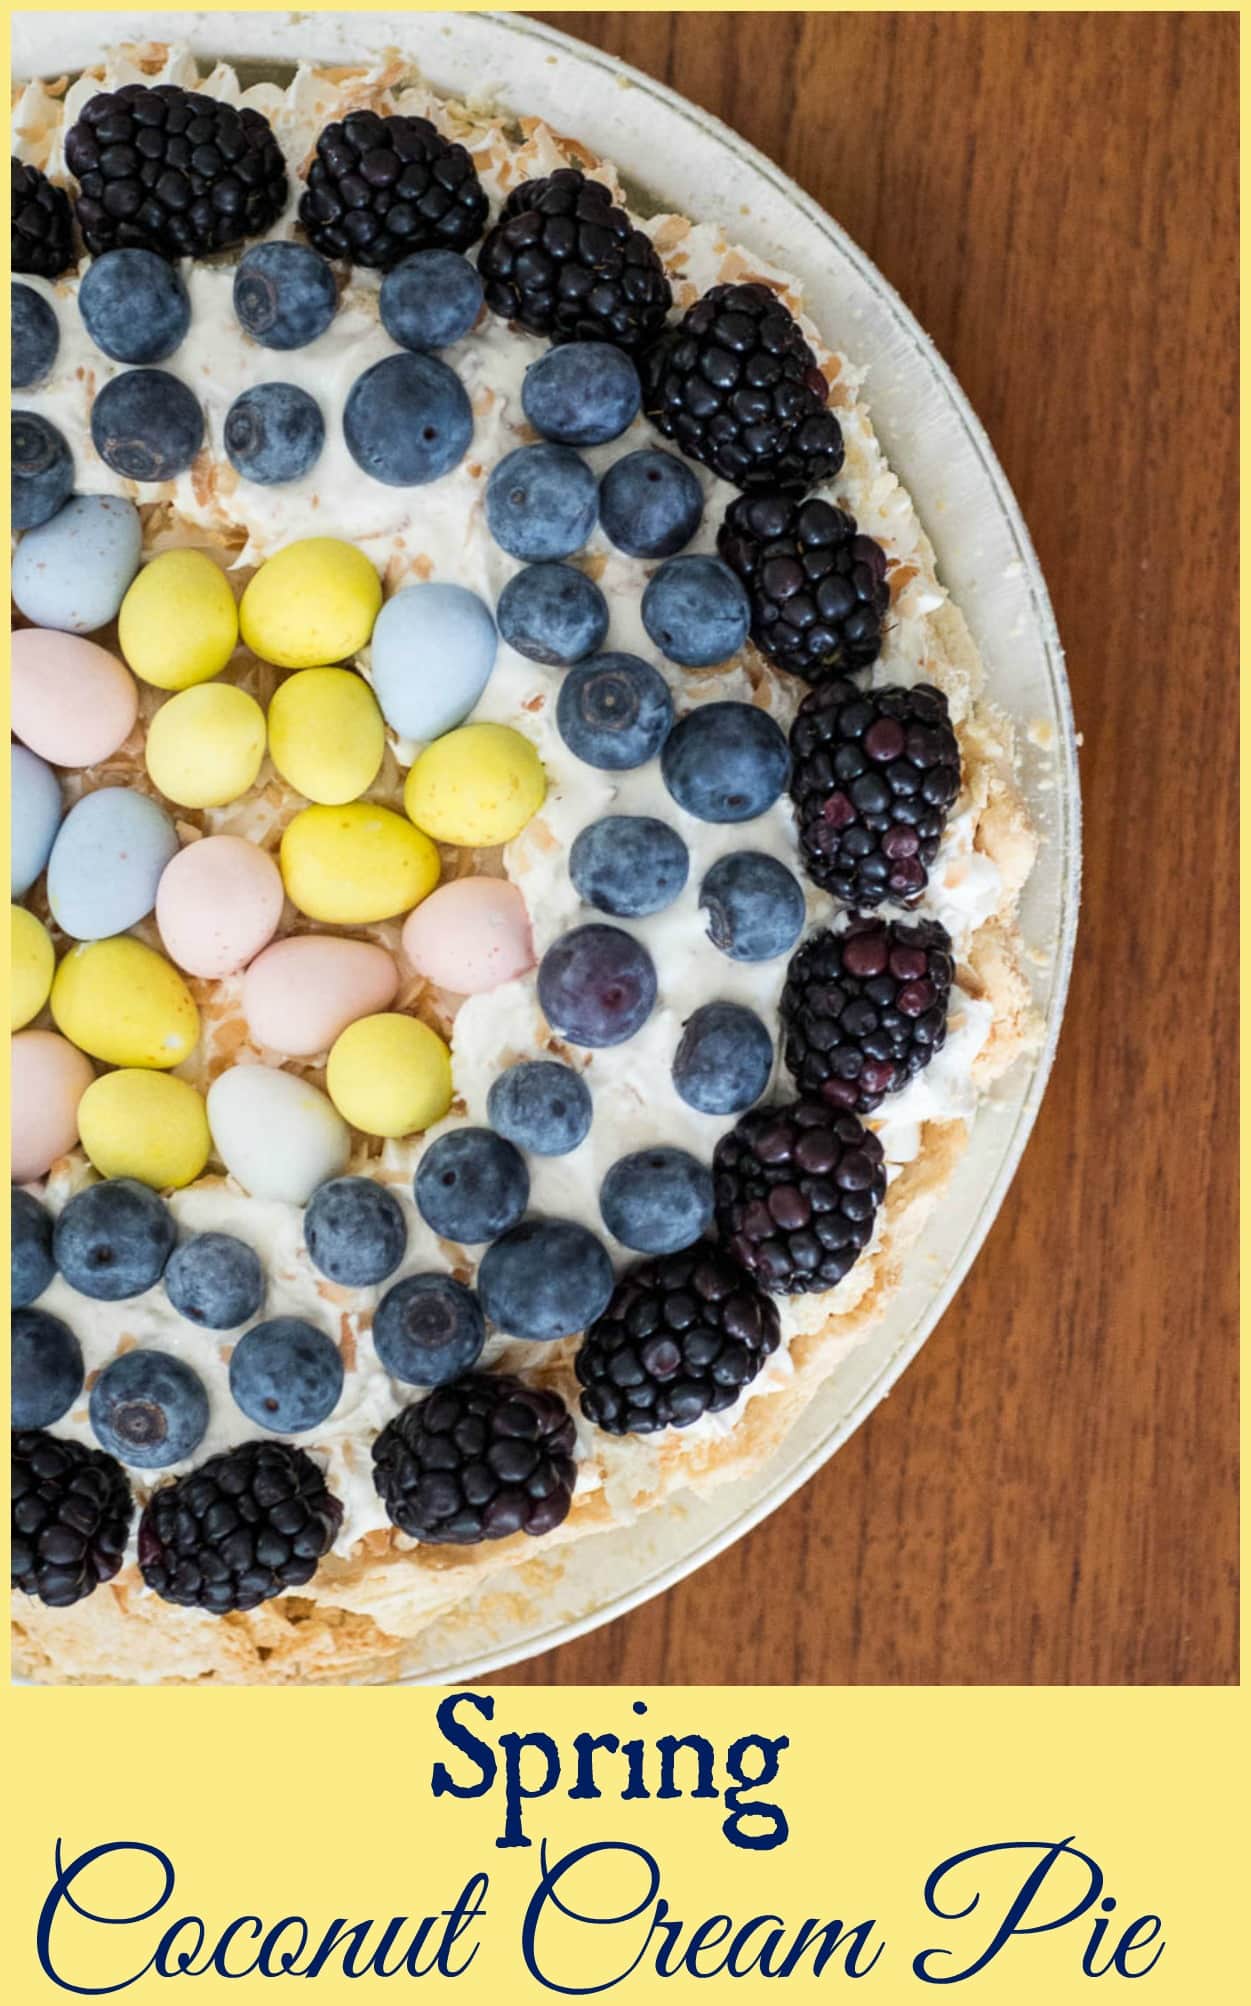 Make an easy Spring dessert by decorating a Coconut Cream Pie with fresh fruit and chocolate eggs.